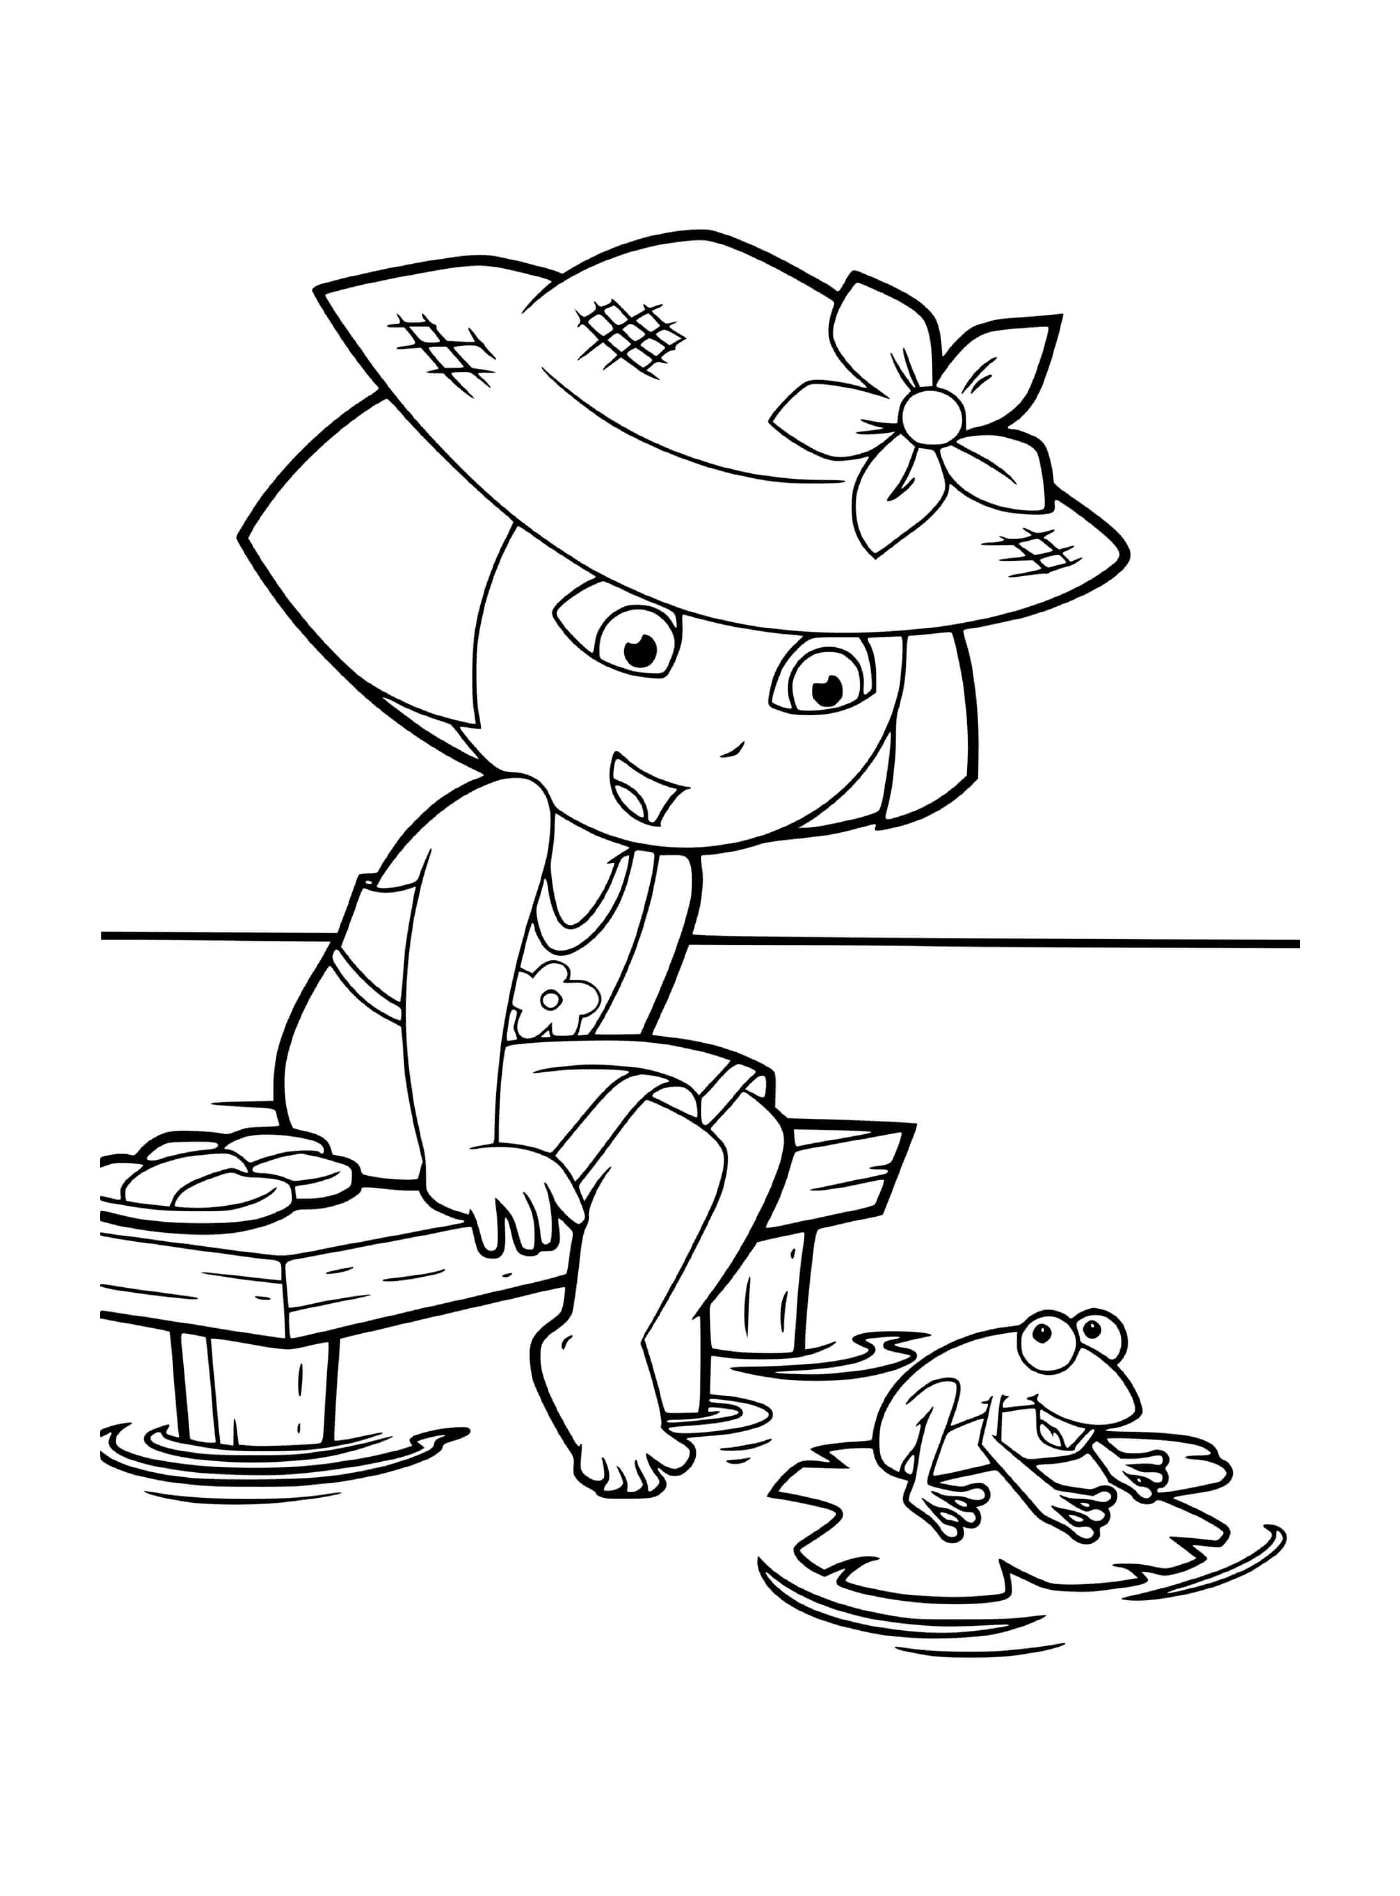  Dora camping near the lake with a frog 